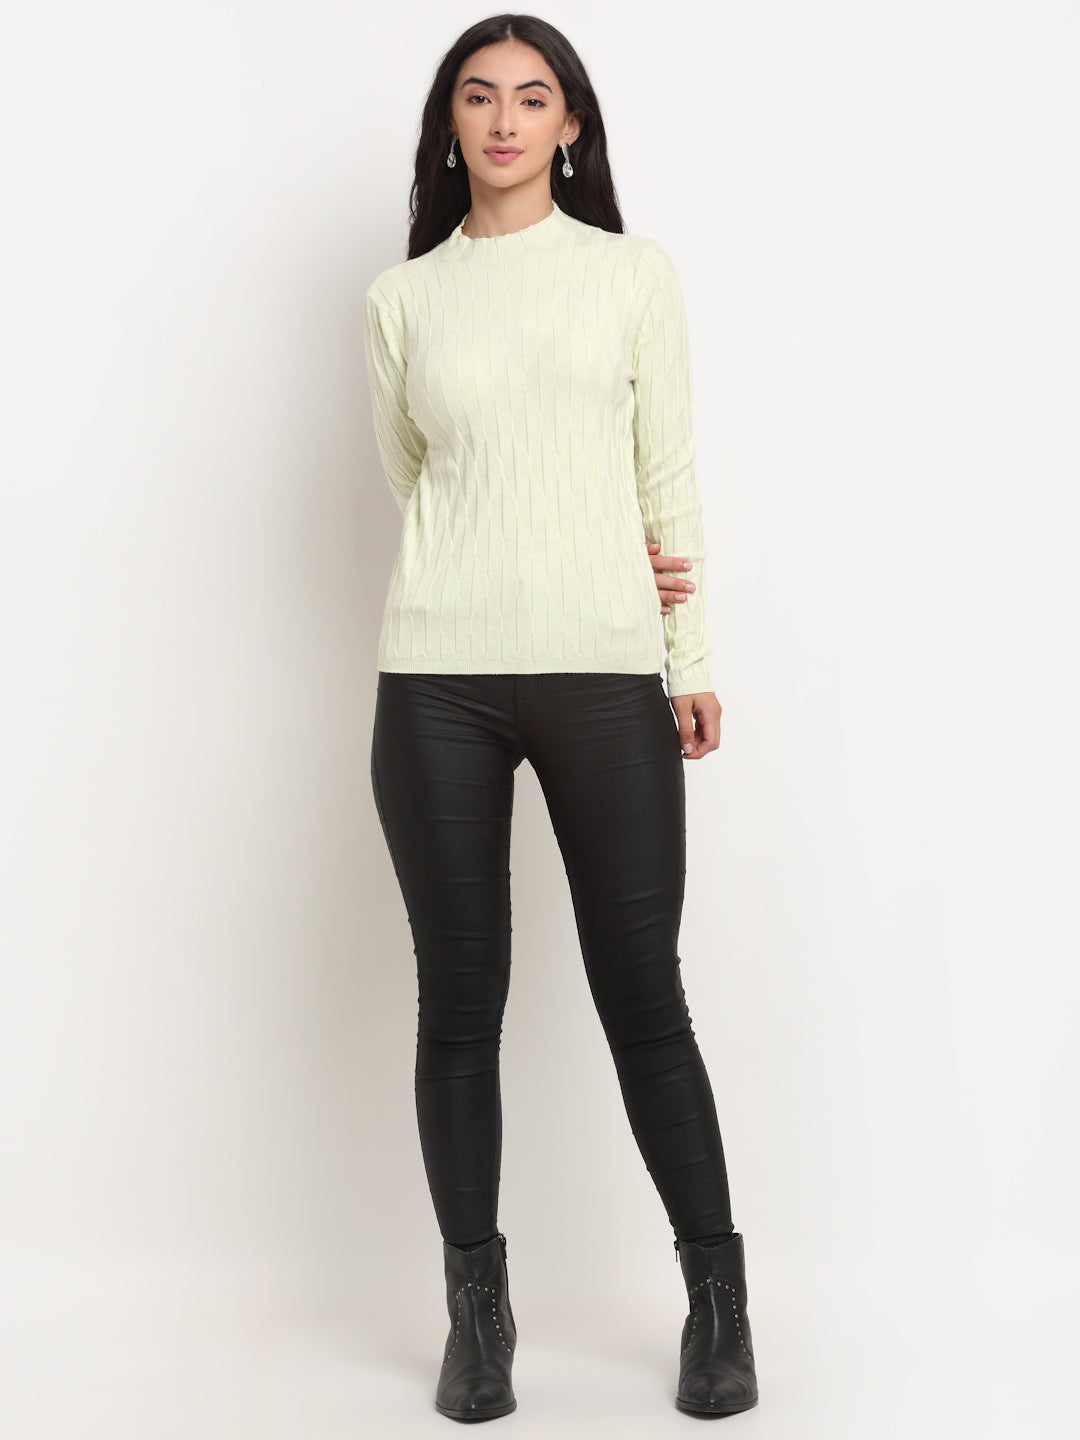 Buy Off White High Neck Solid Skeevi